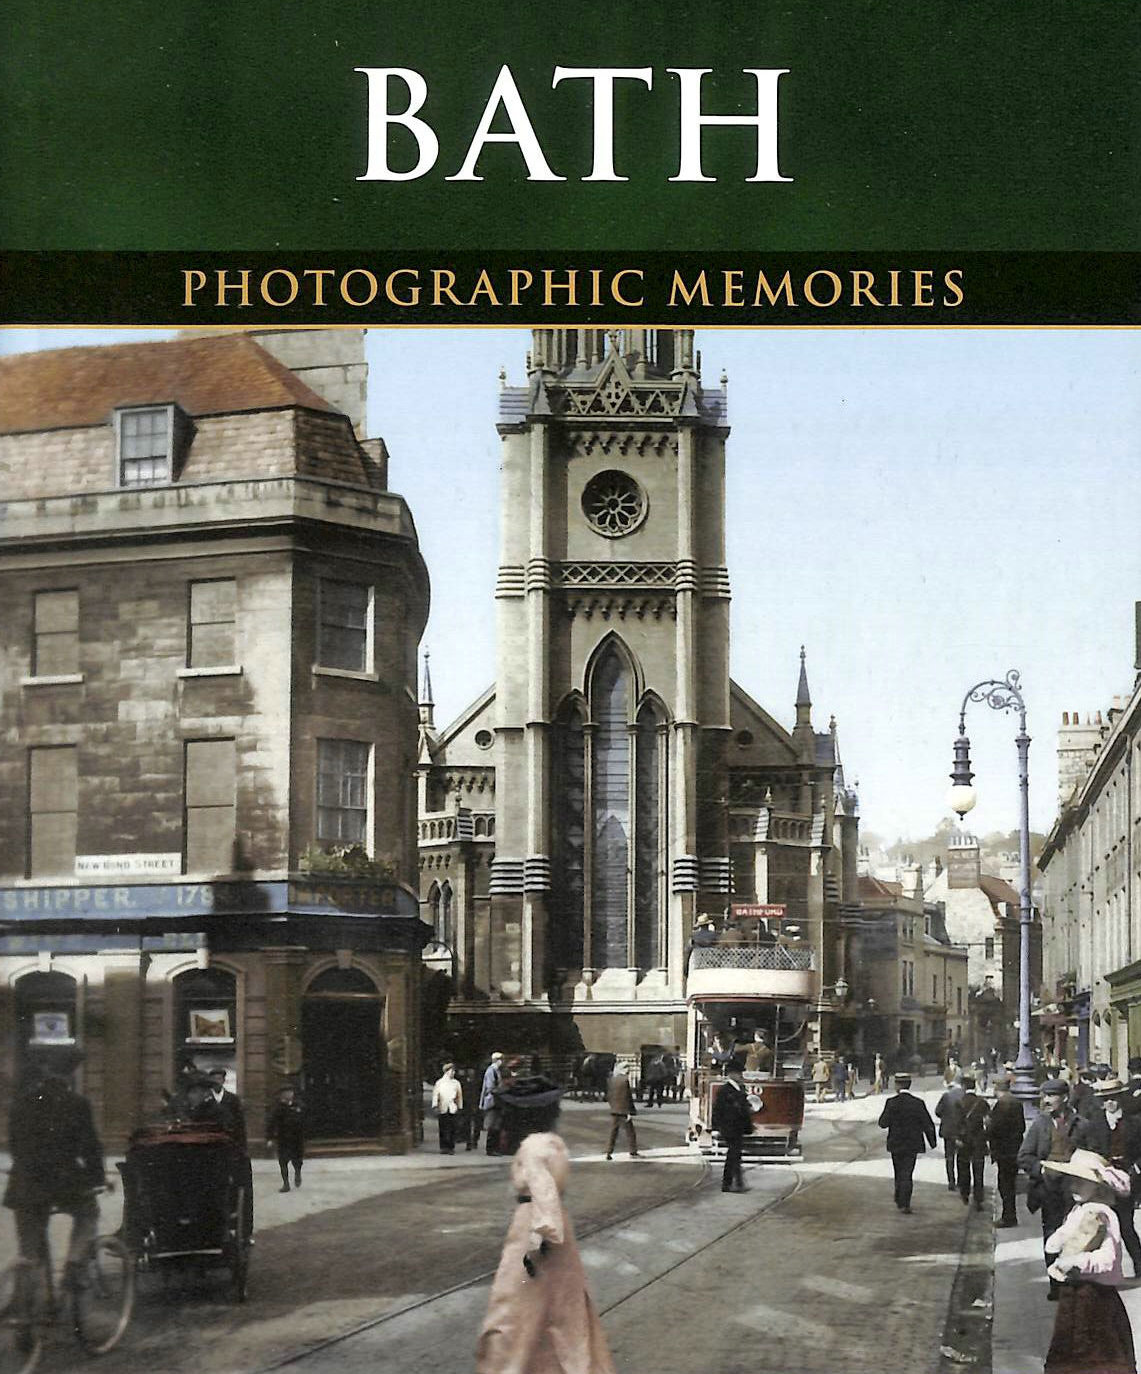 ANDREW, MARTIN; THE FRANCIS FRITH COLLECTION [PHOTOGRAPHER] - Bath (Photographic Memories)